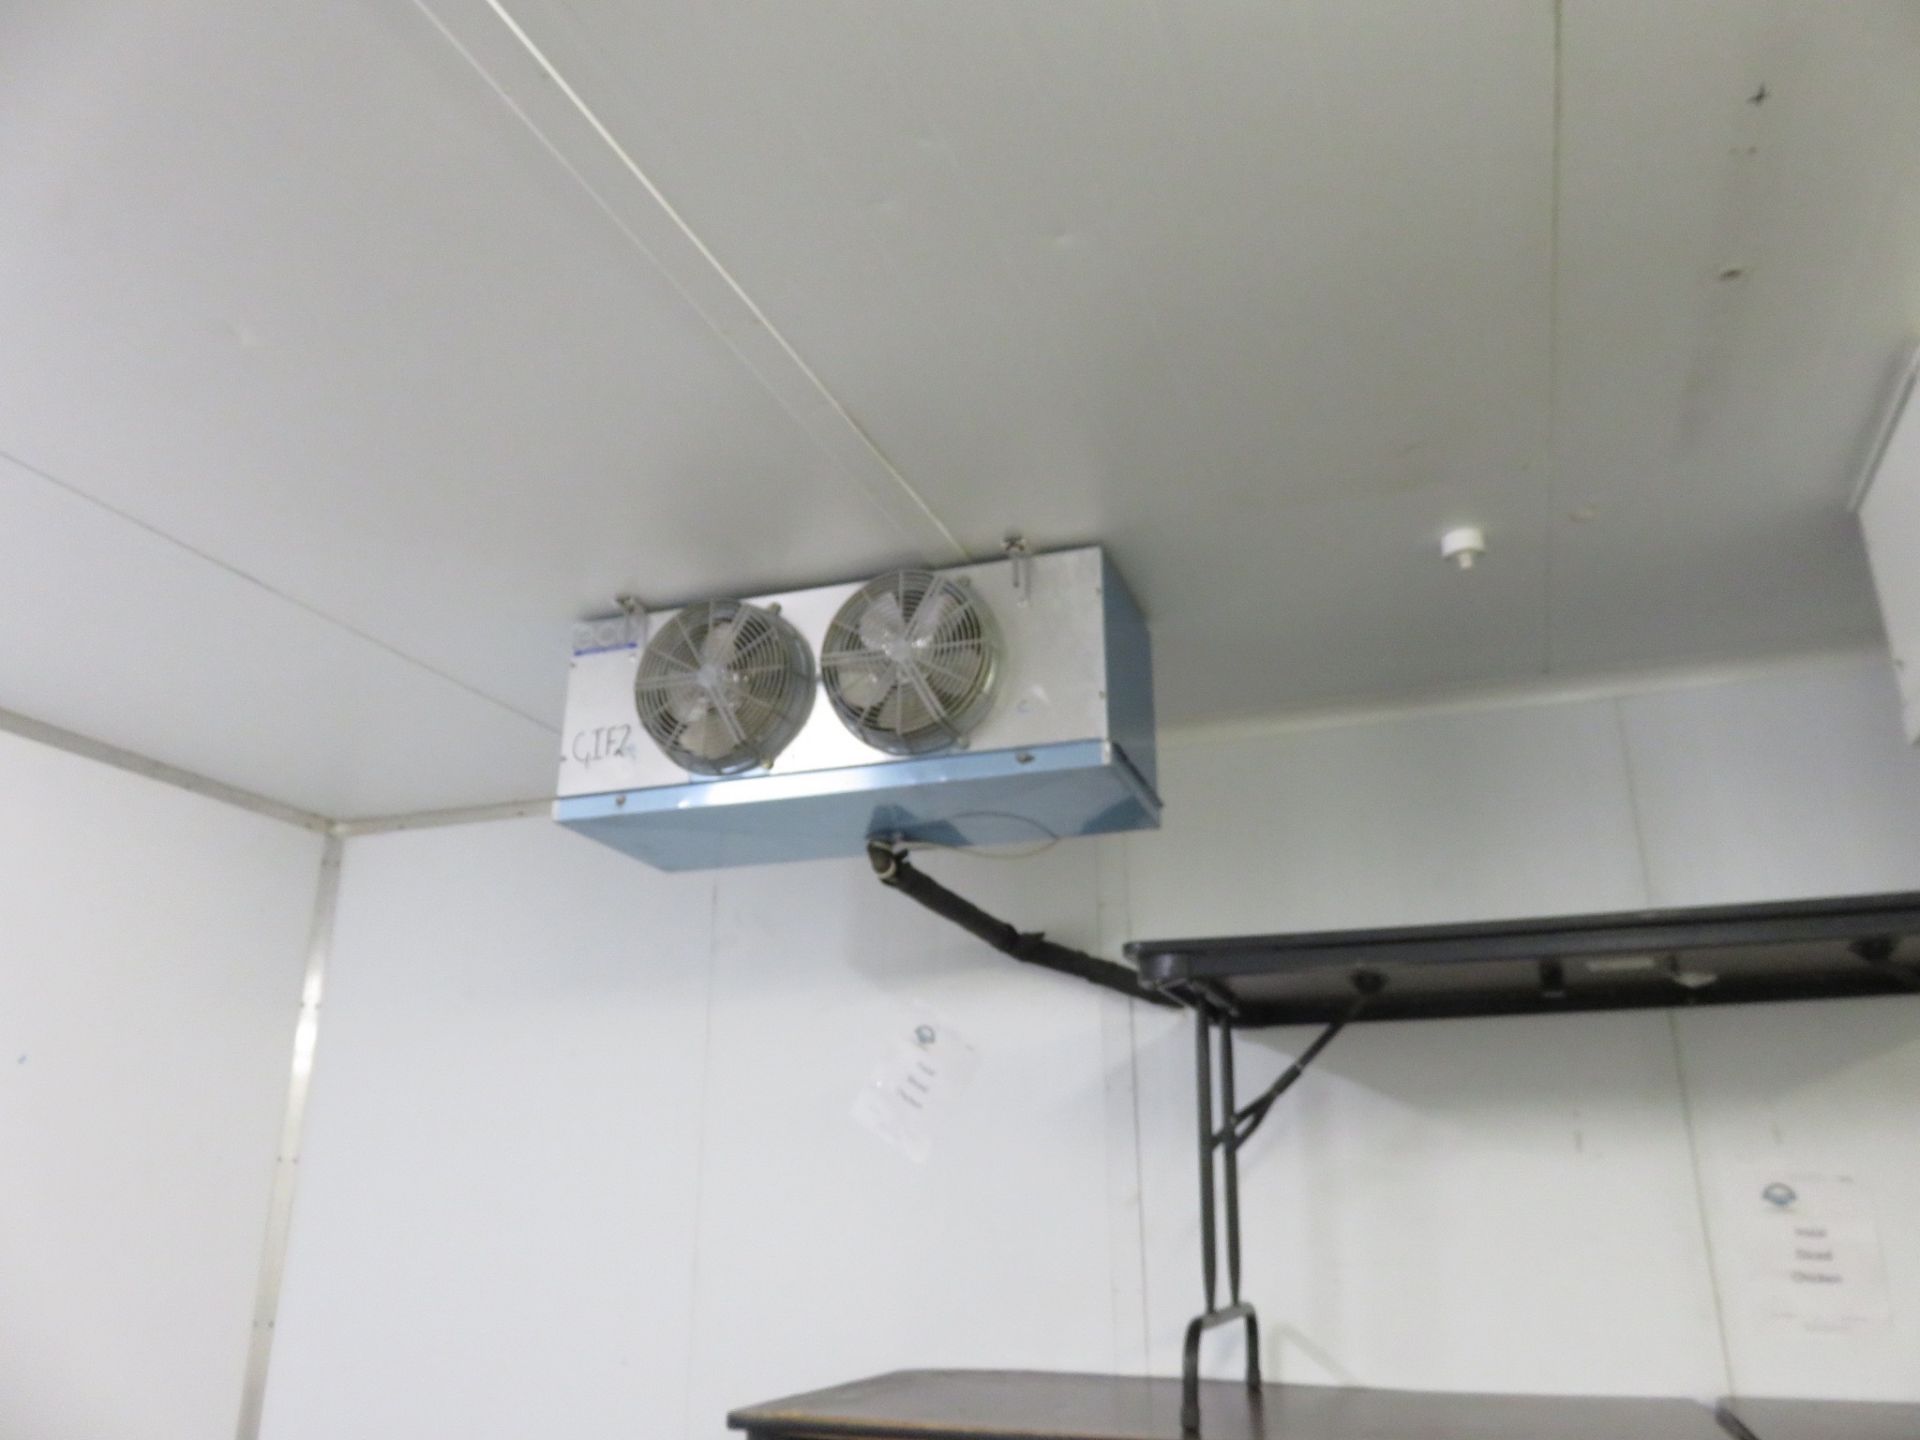 Freezer Room: Panelling Approx 6800 x 5700x 2800mm high. Searle 3 fan evap GIF1. LO £500 - Image 5 of 10